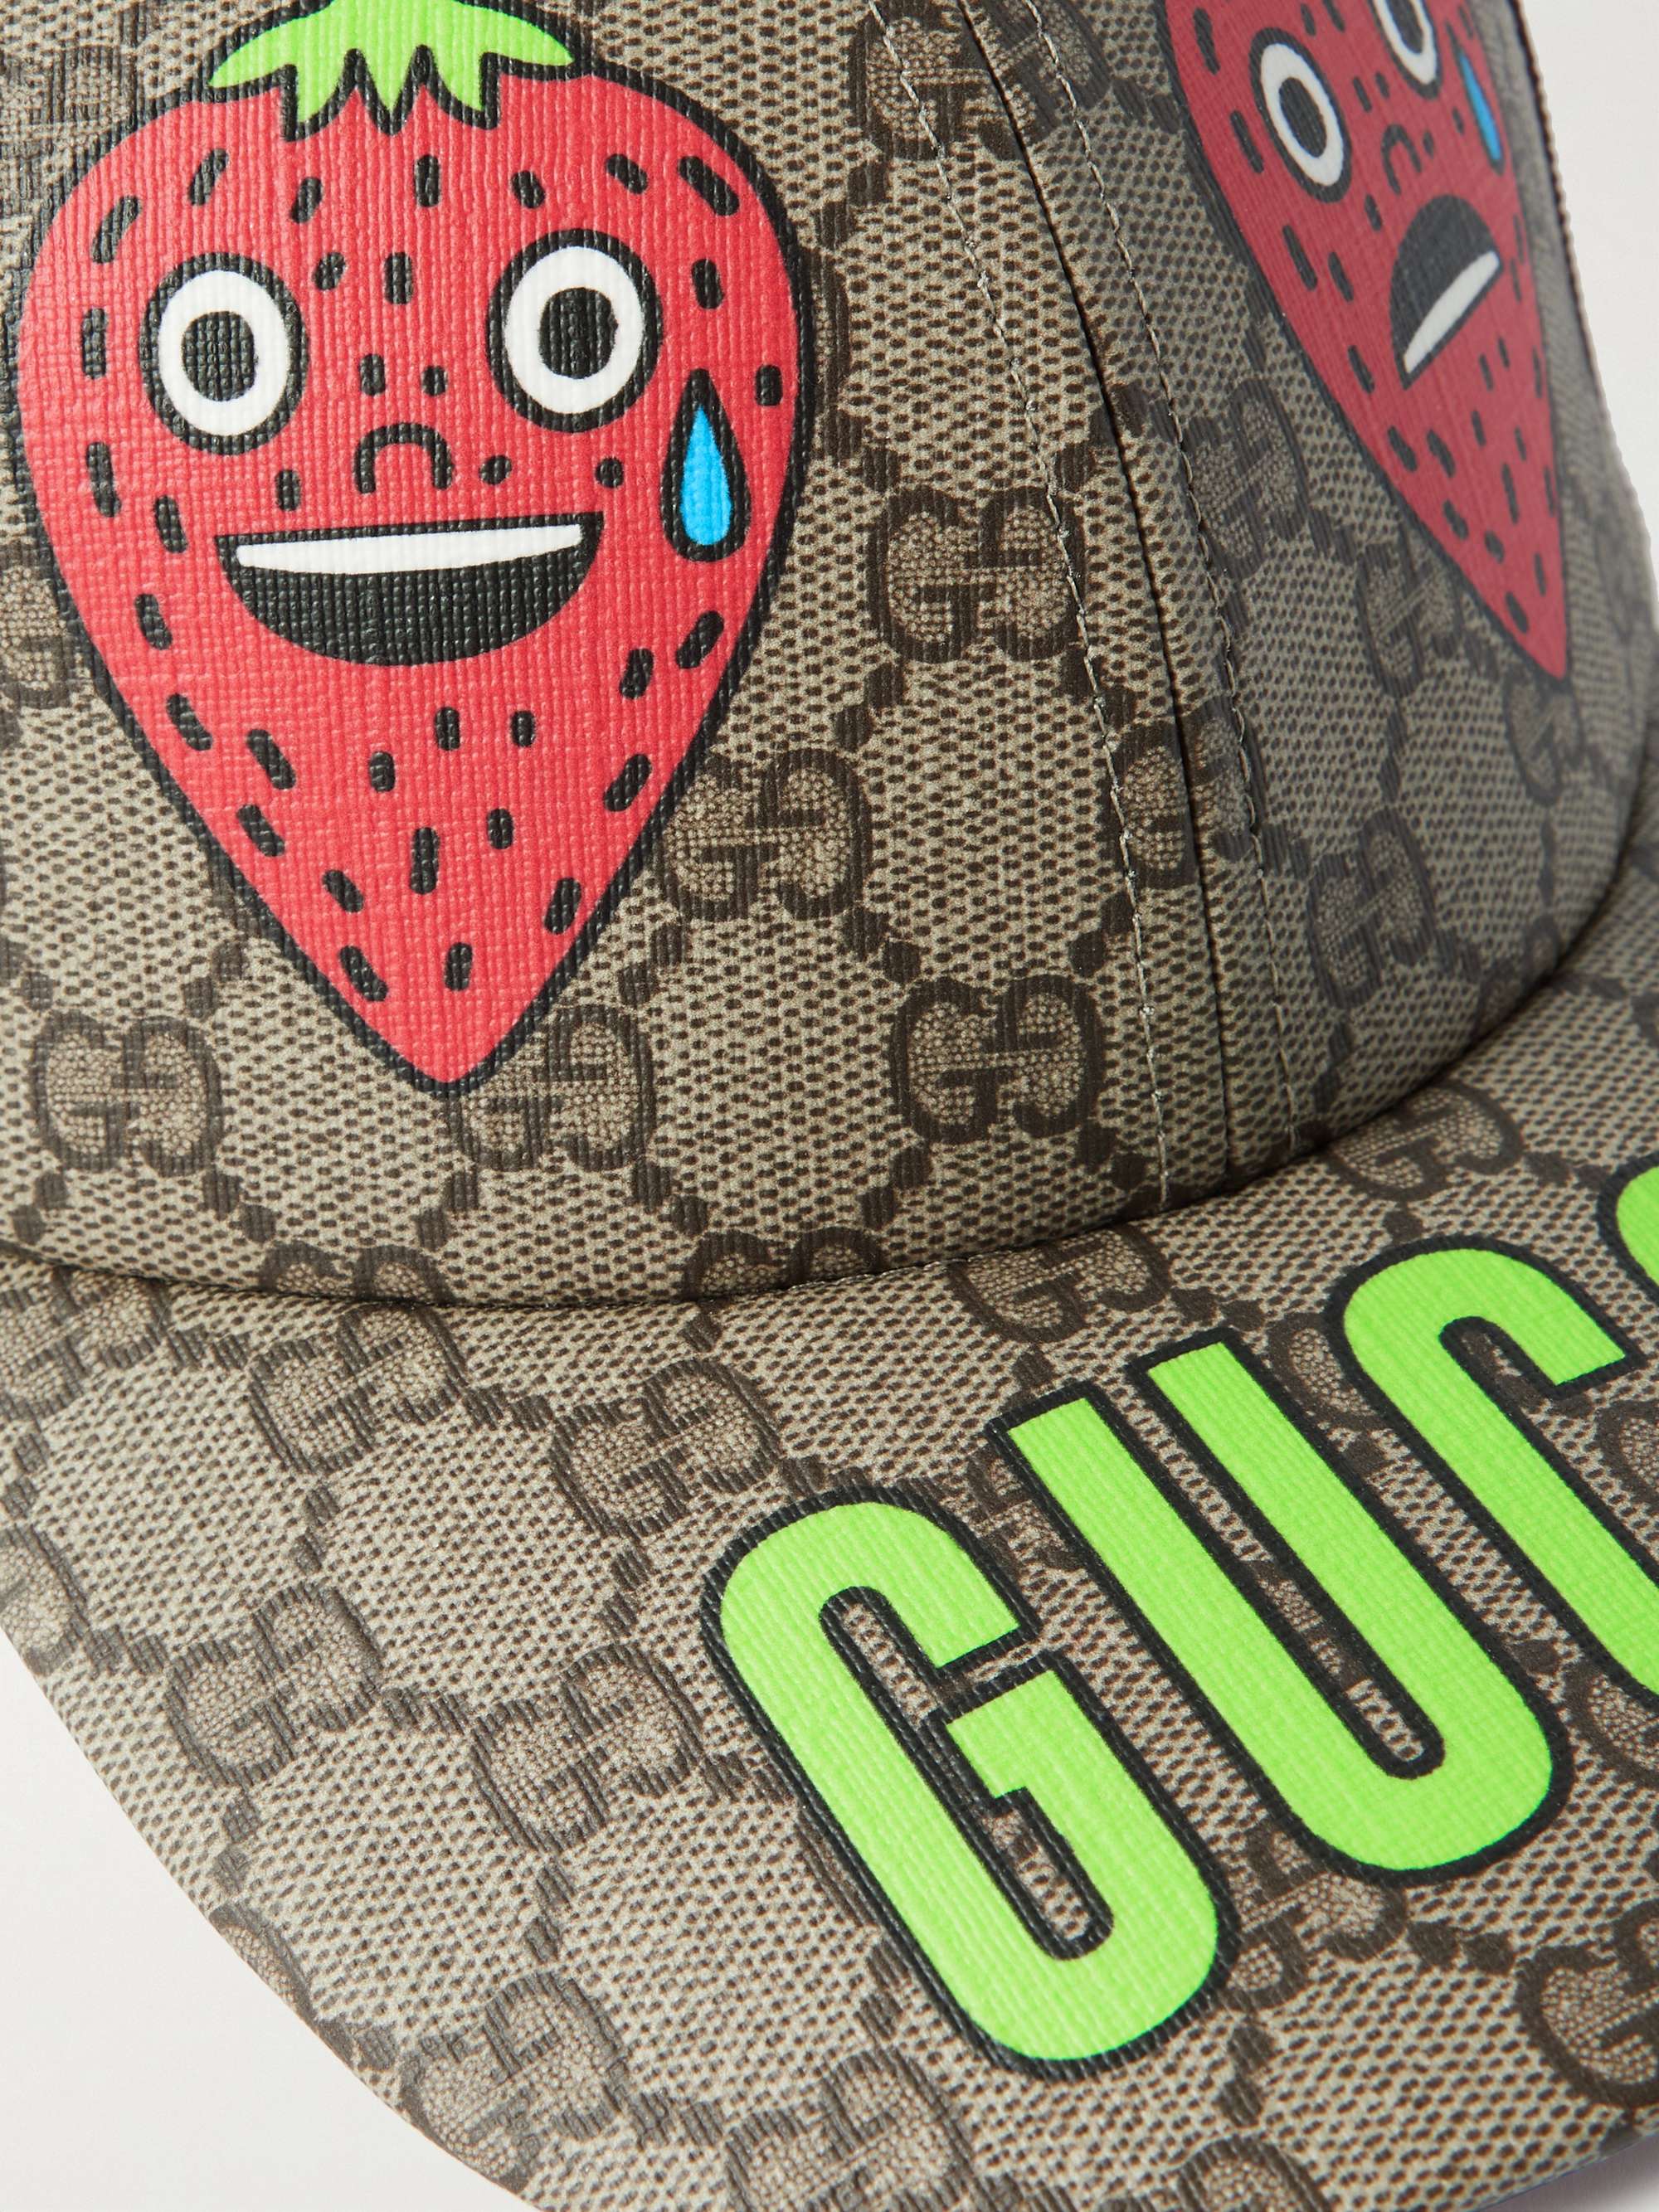 GUCCI Printed Monogrammed Cotton-Blend Canvas and Mesh Baseball Cap